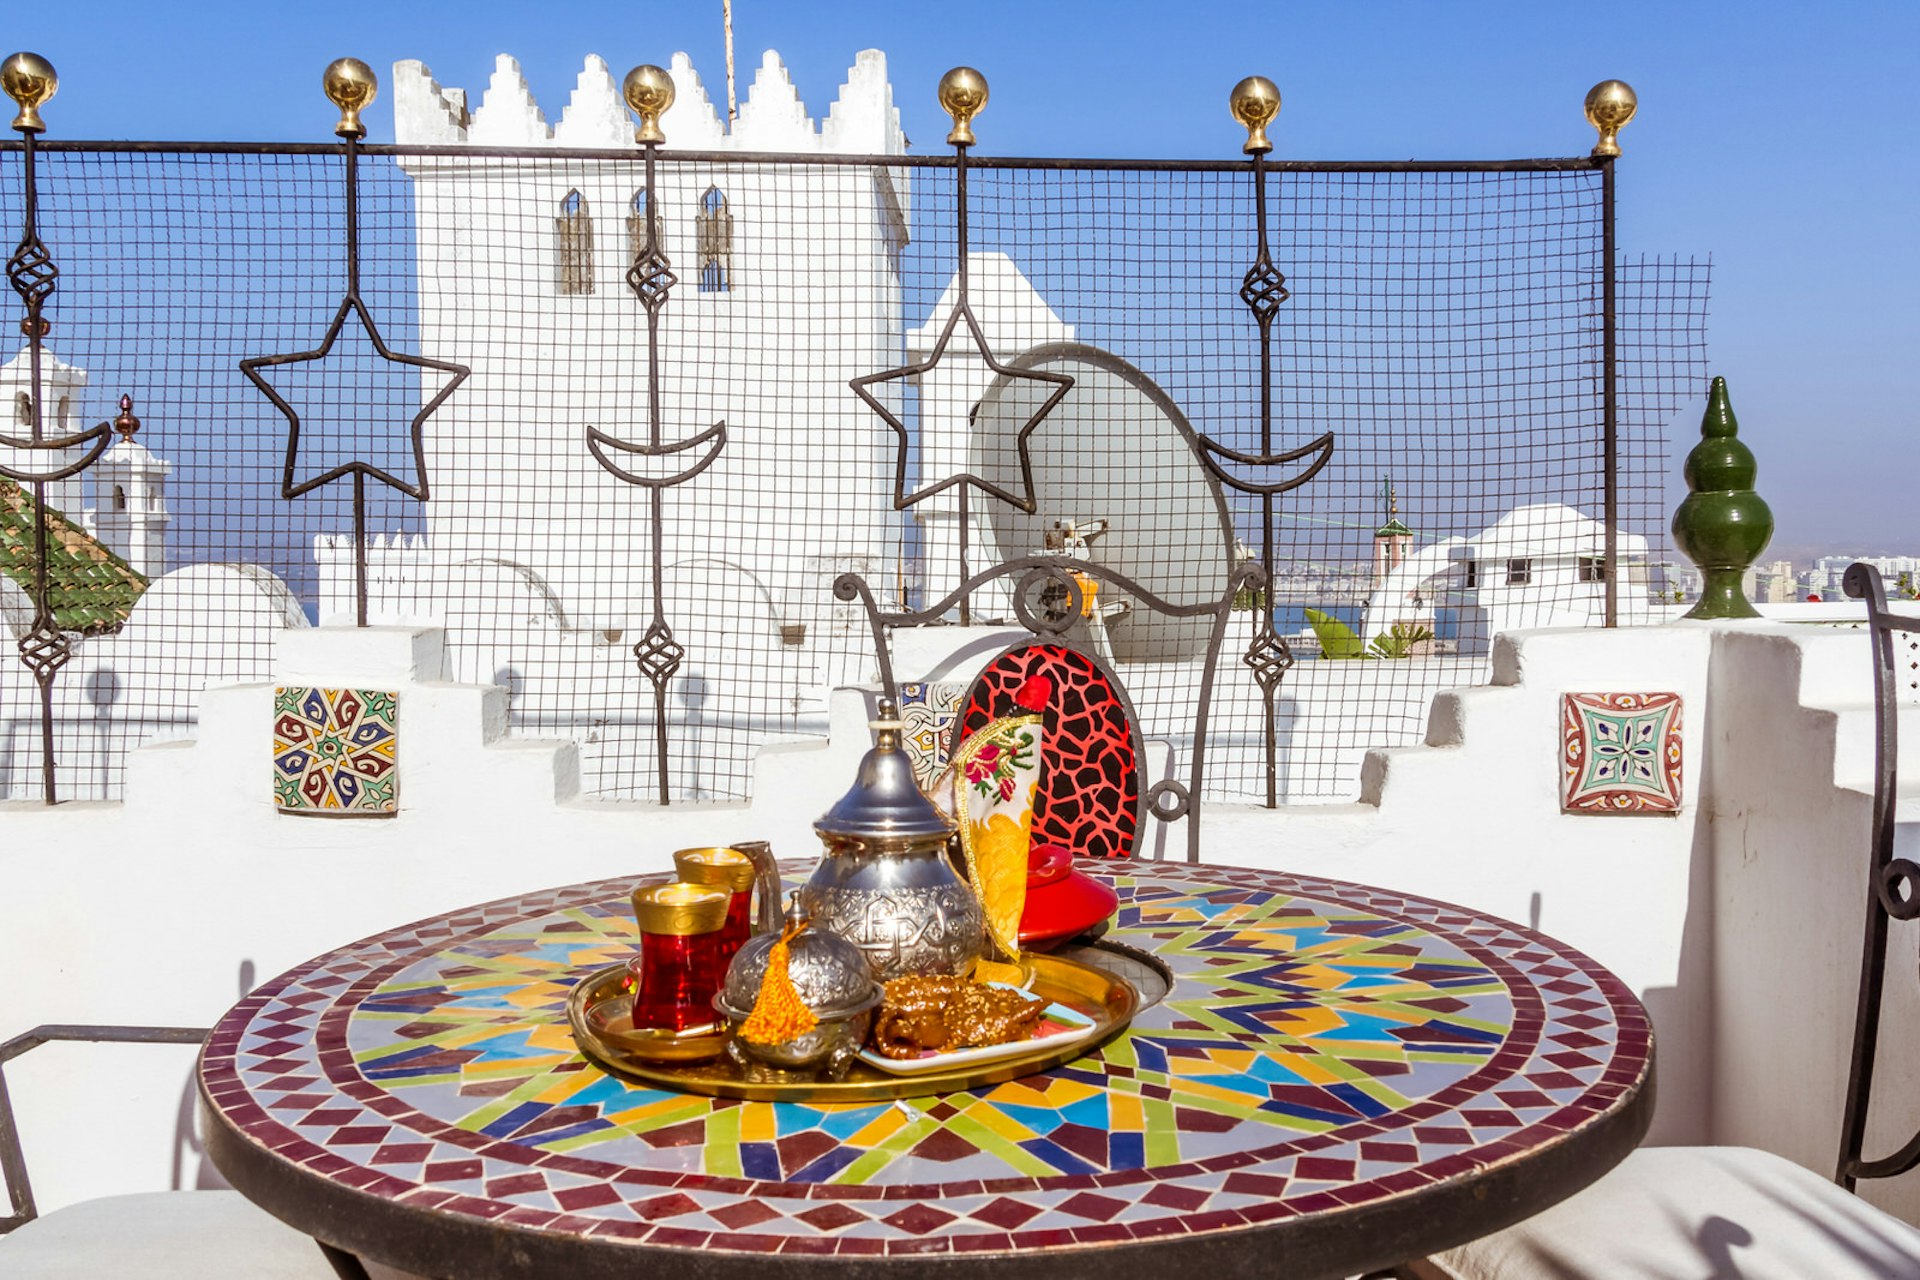 Tea service on terrace in the kasbah of Tangier, Morocco